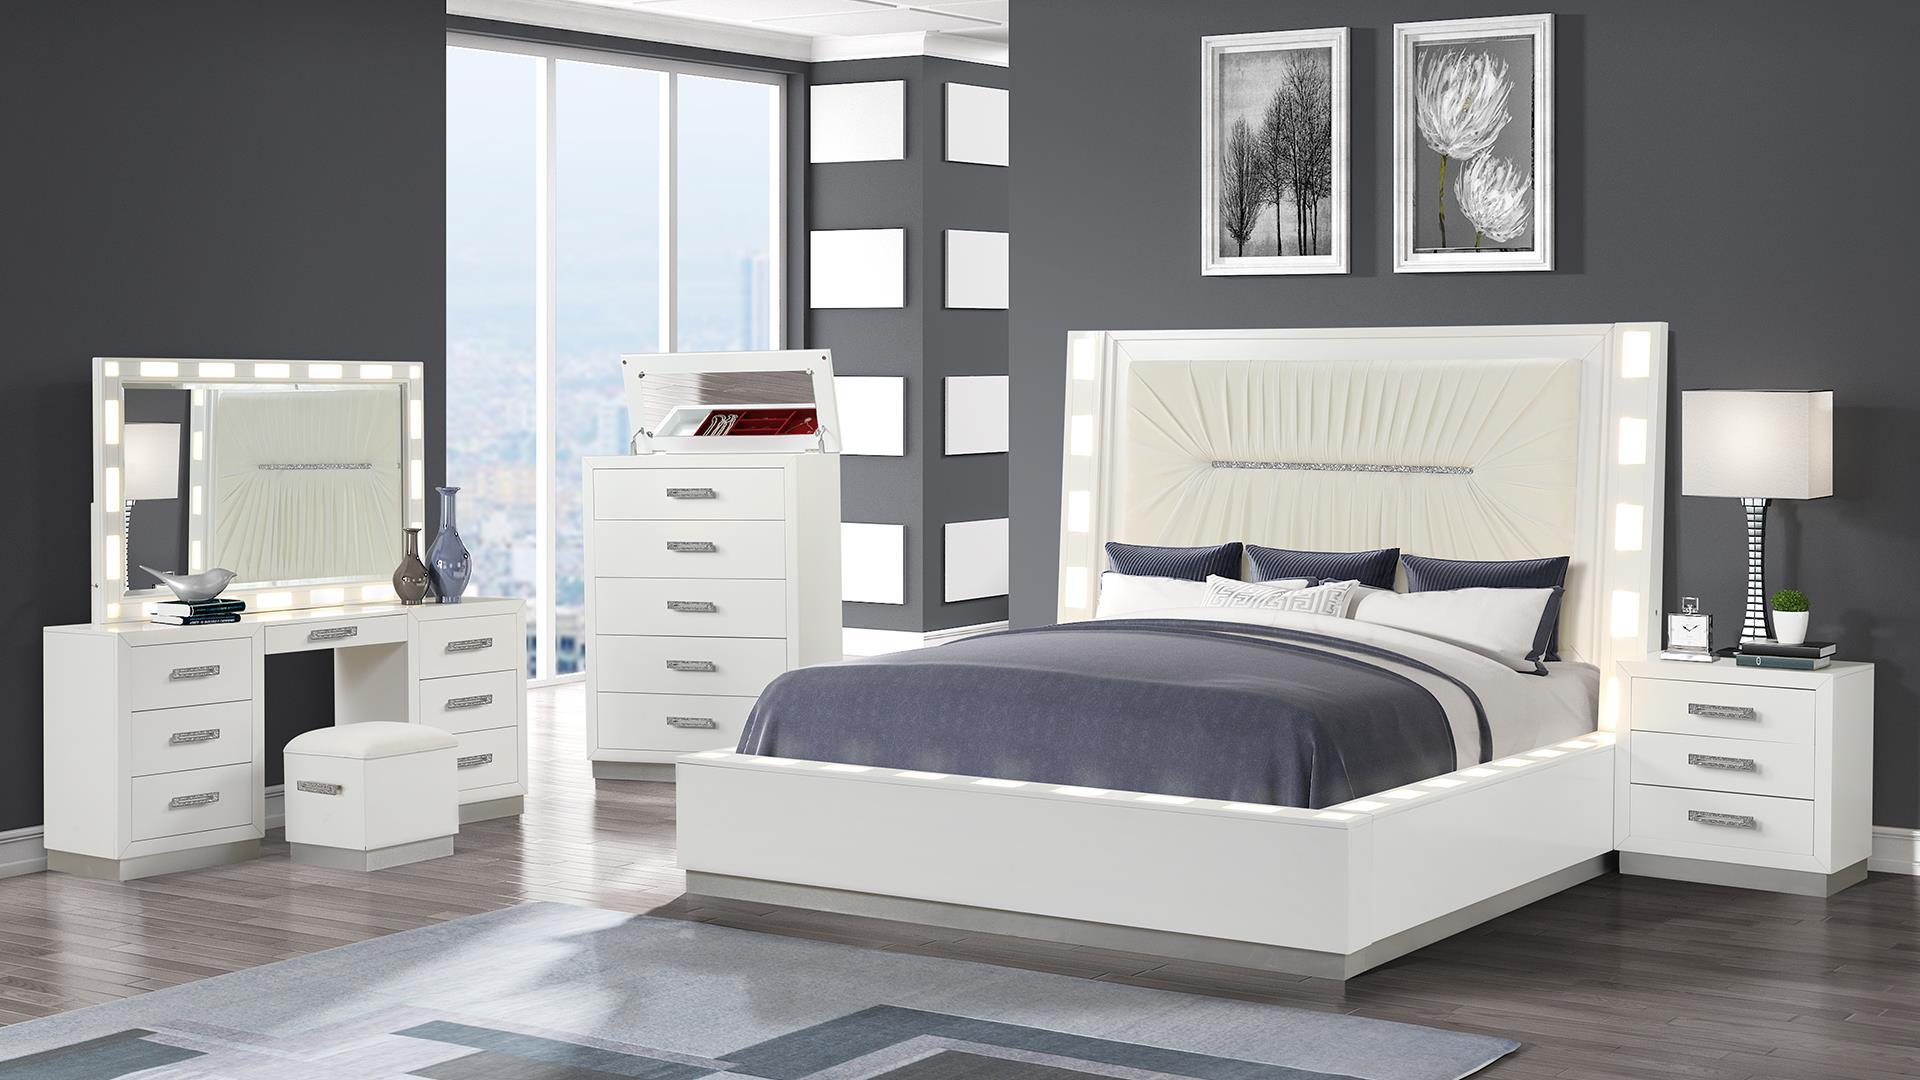 

    
Milky White Solid Wood Queen Bed w/Vanity Set 4Pcs COCO Galaxy Home Modern
